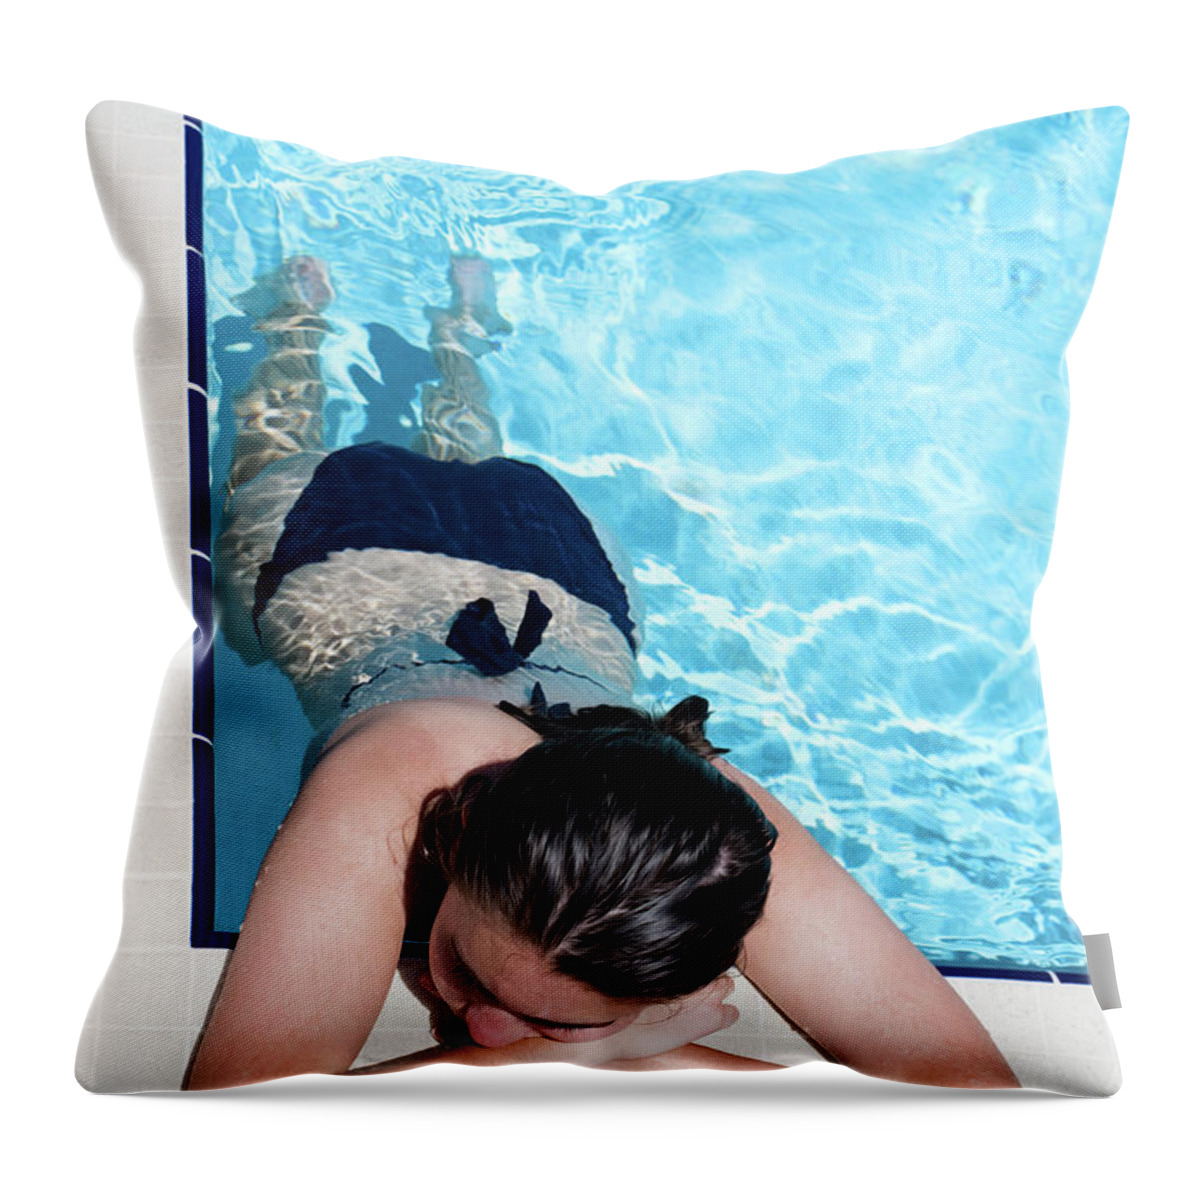 Swimming Pool Throw Pillow featuring the photograph Poolside by Laura Fasulo